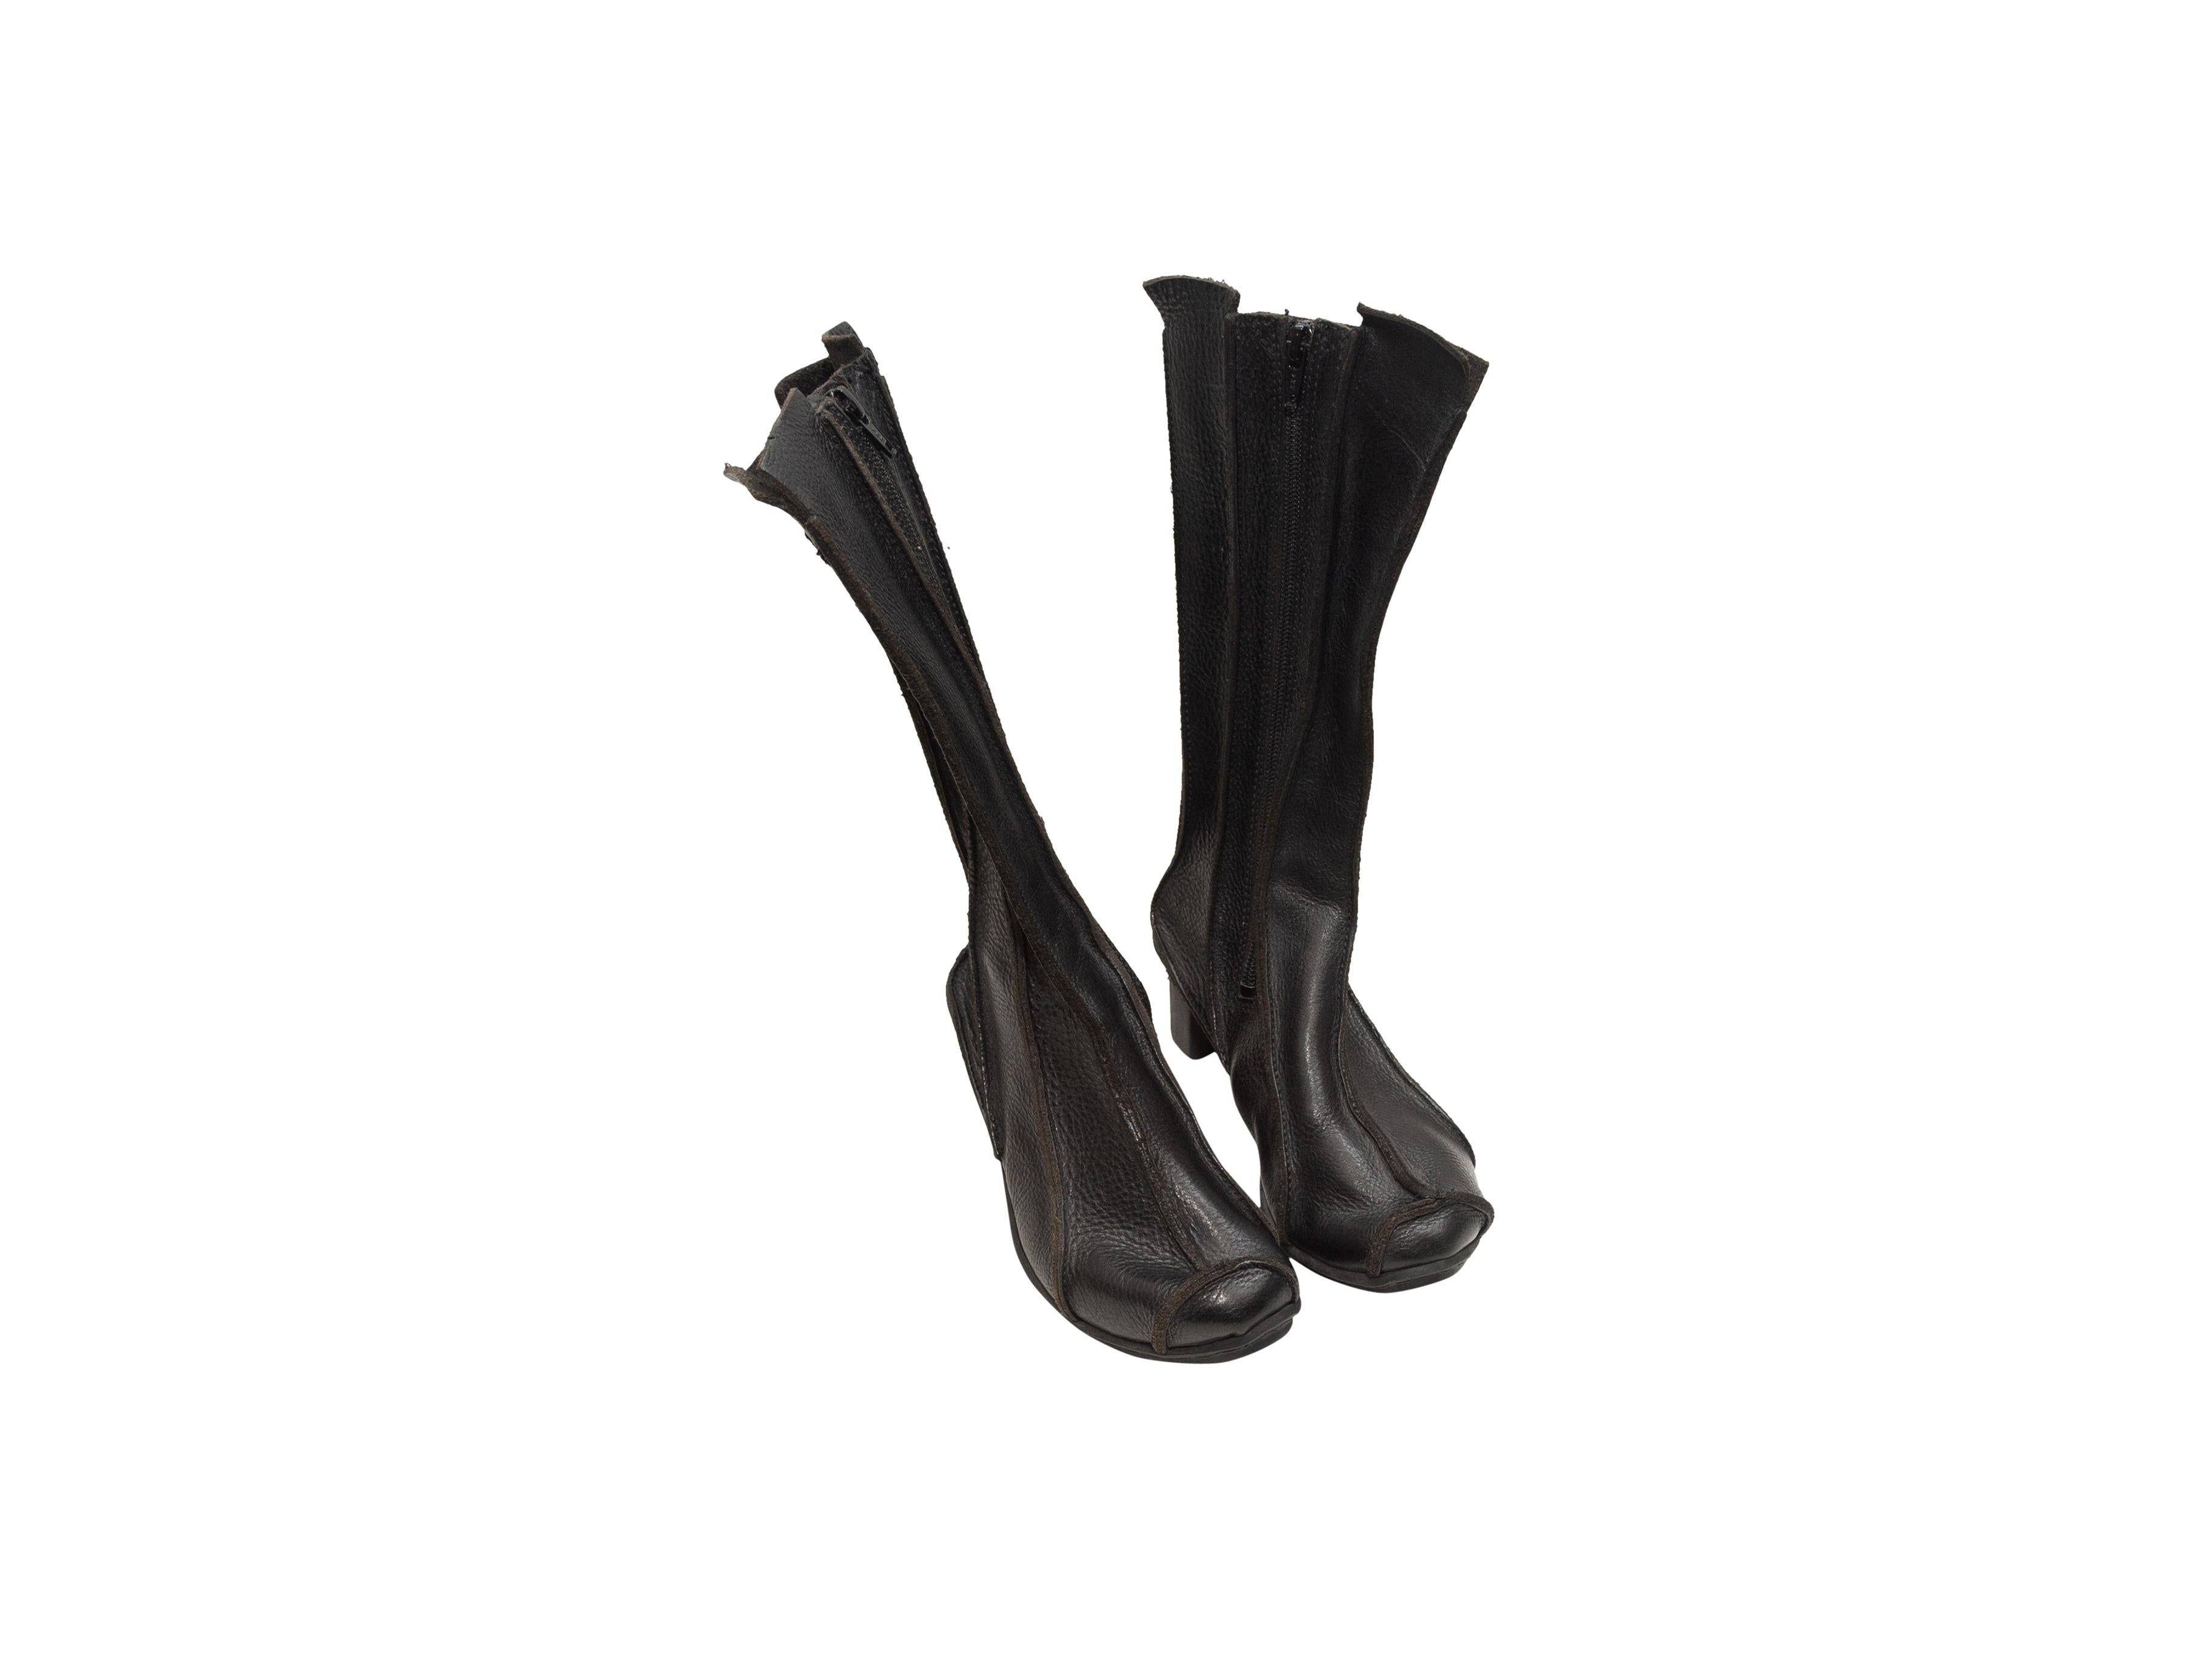 Product details: Black leather panel wedge boots by Trippen. Rubber soles. Zip closures at inner sides. 2